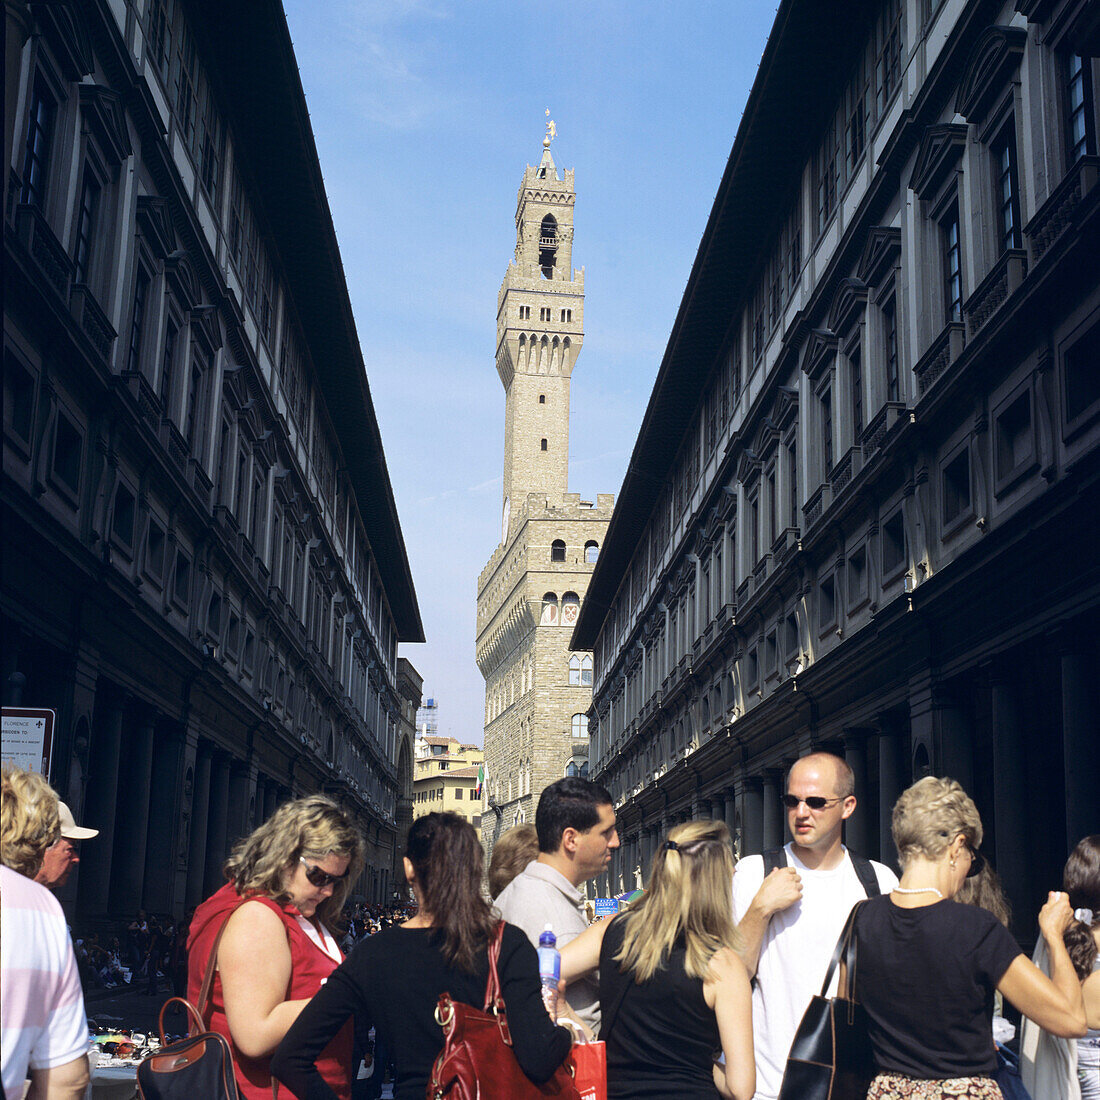 People standing in a queue in front of Uffizi, Palazzo Vecchio in the background, Firence, Italy